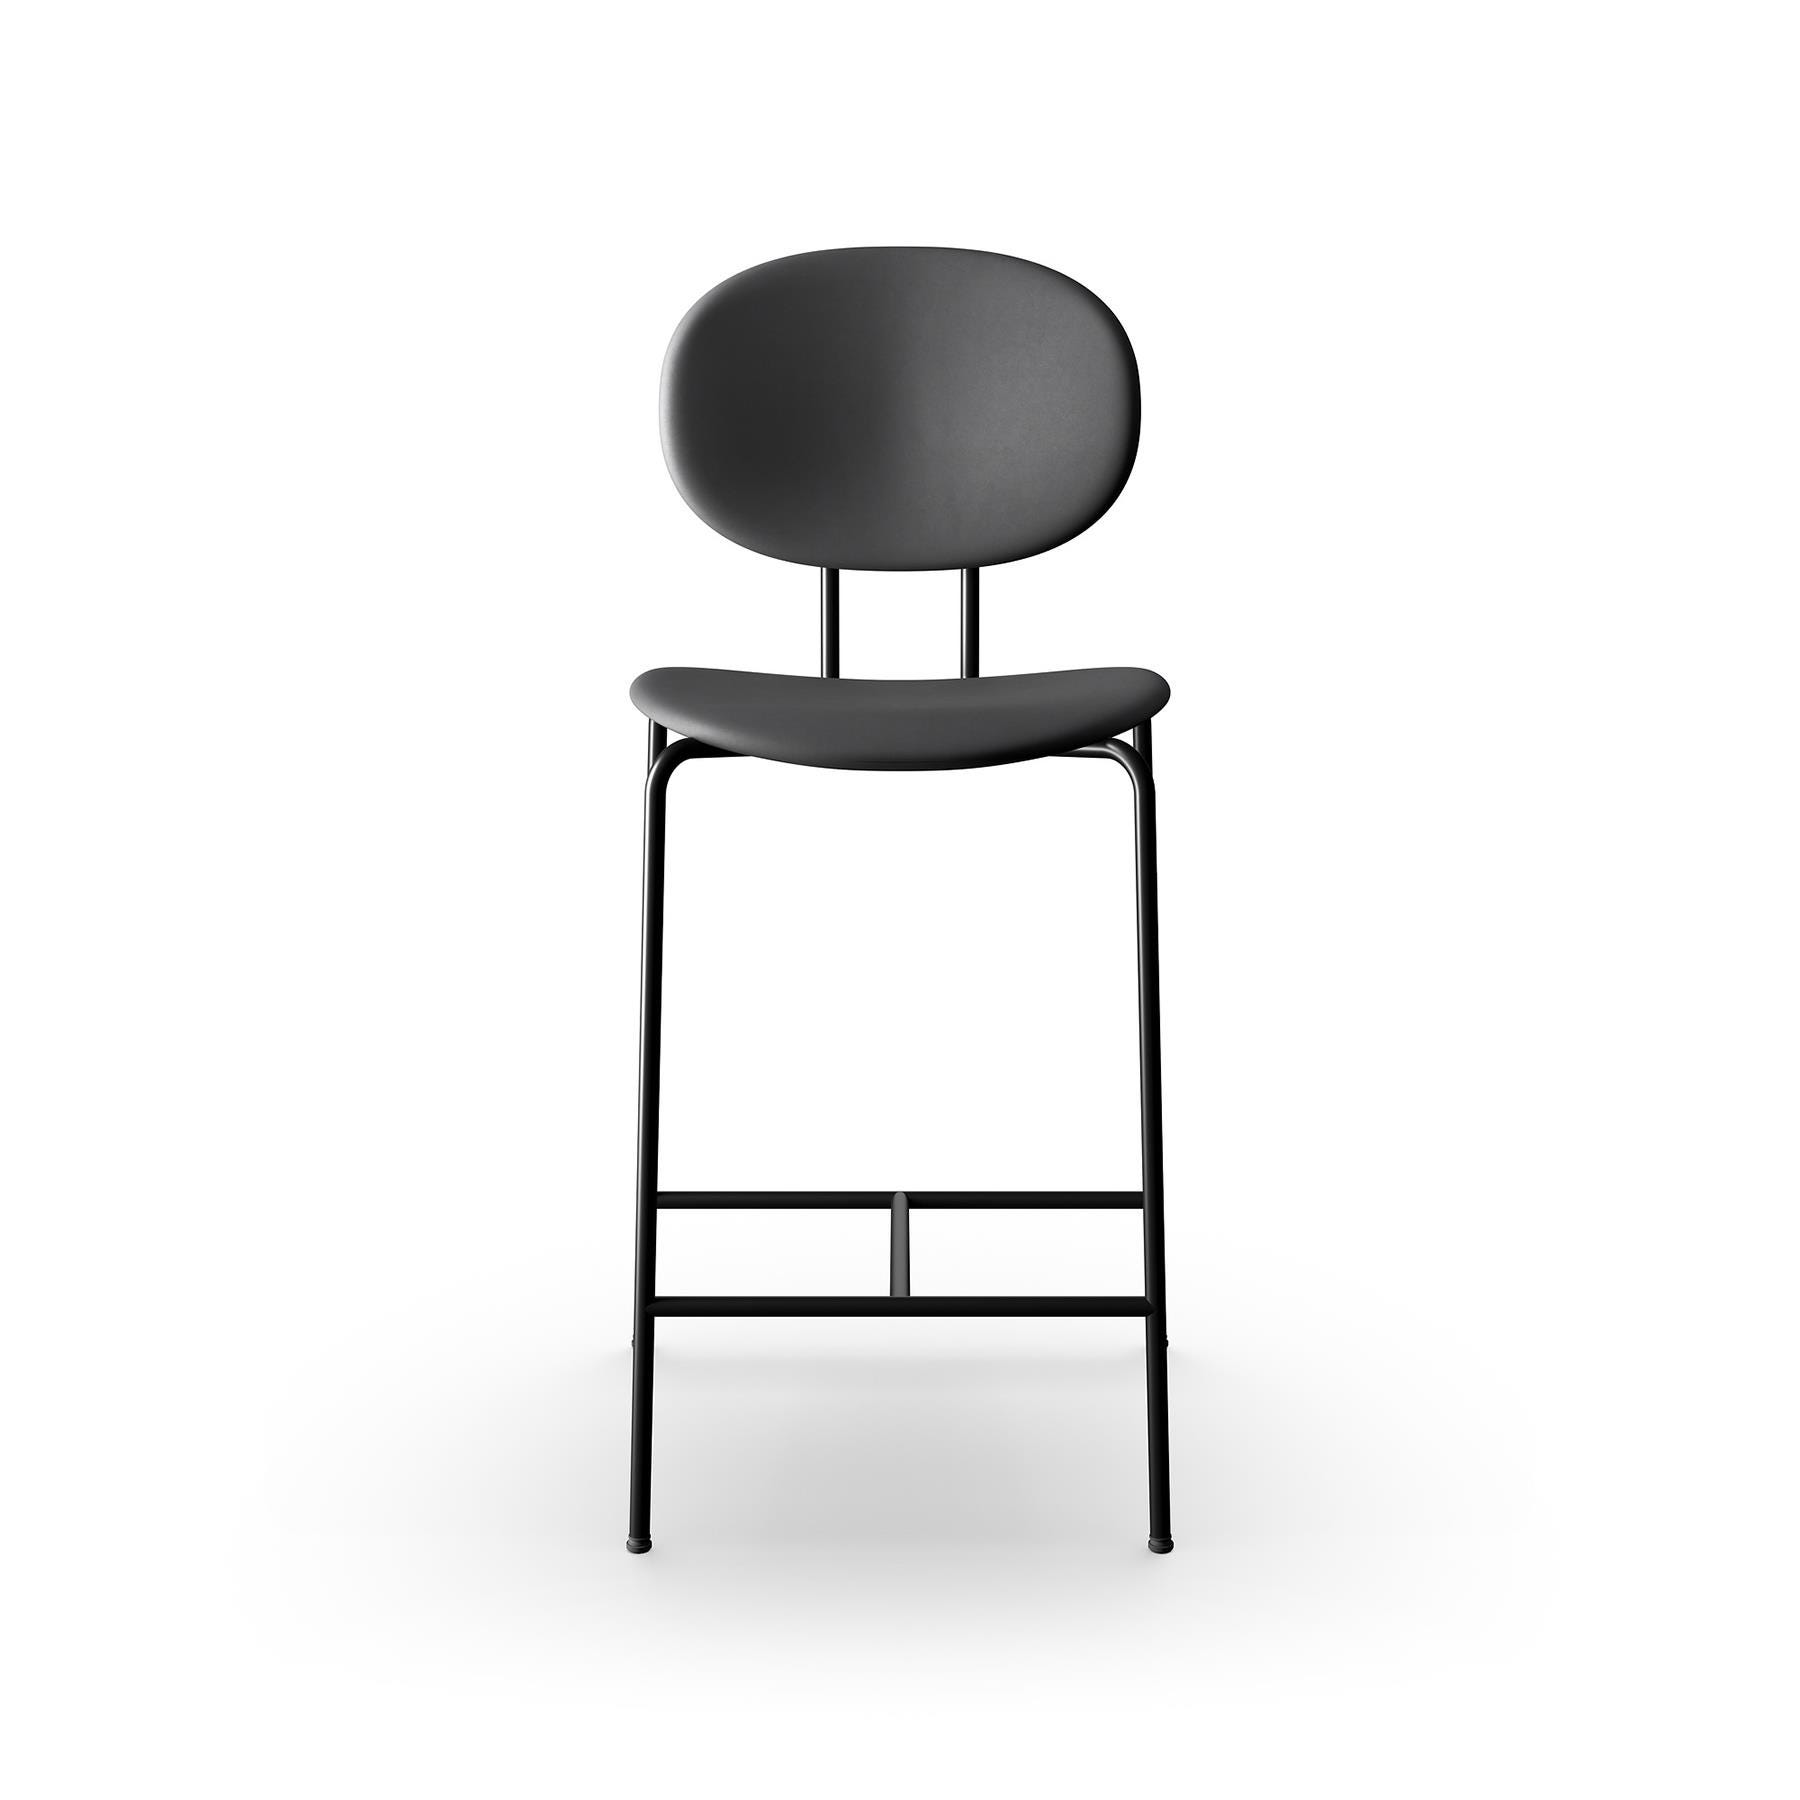 Sibast Piet Hein Bar Chair Upholstered Black Steel Dunes Anthracite Leather High Bar Stool Designer Furniture From Holloways Of Ludlow